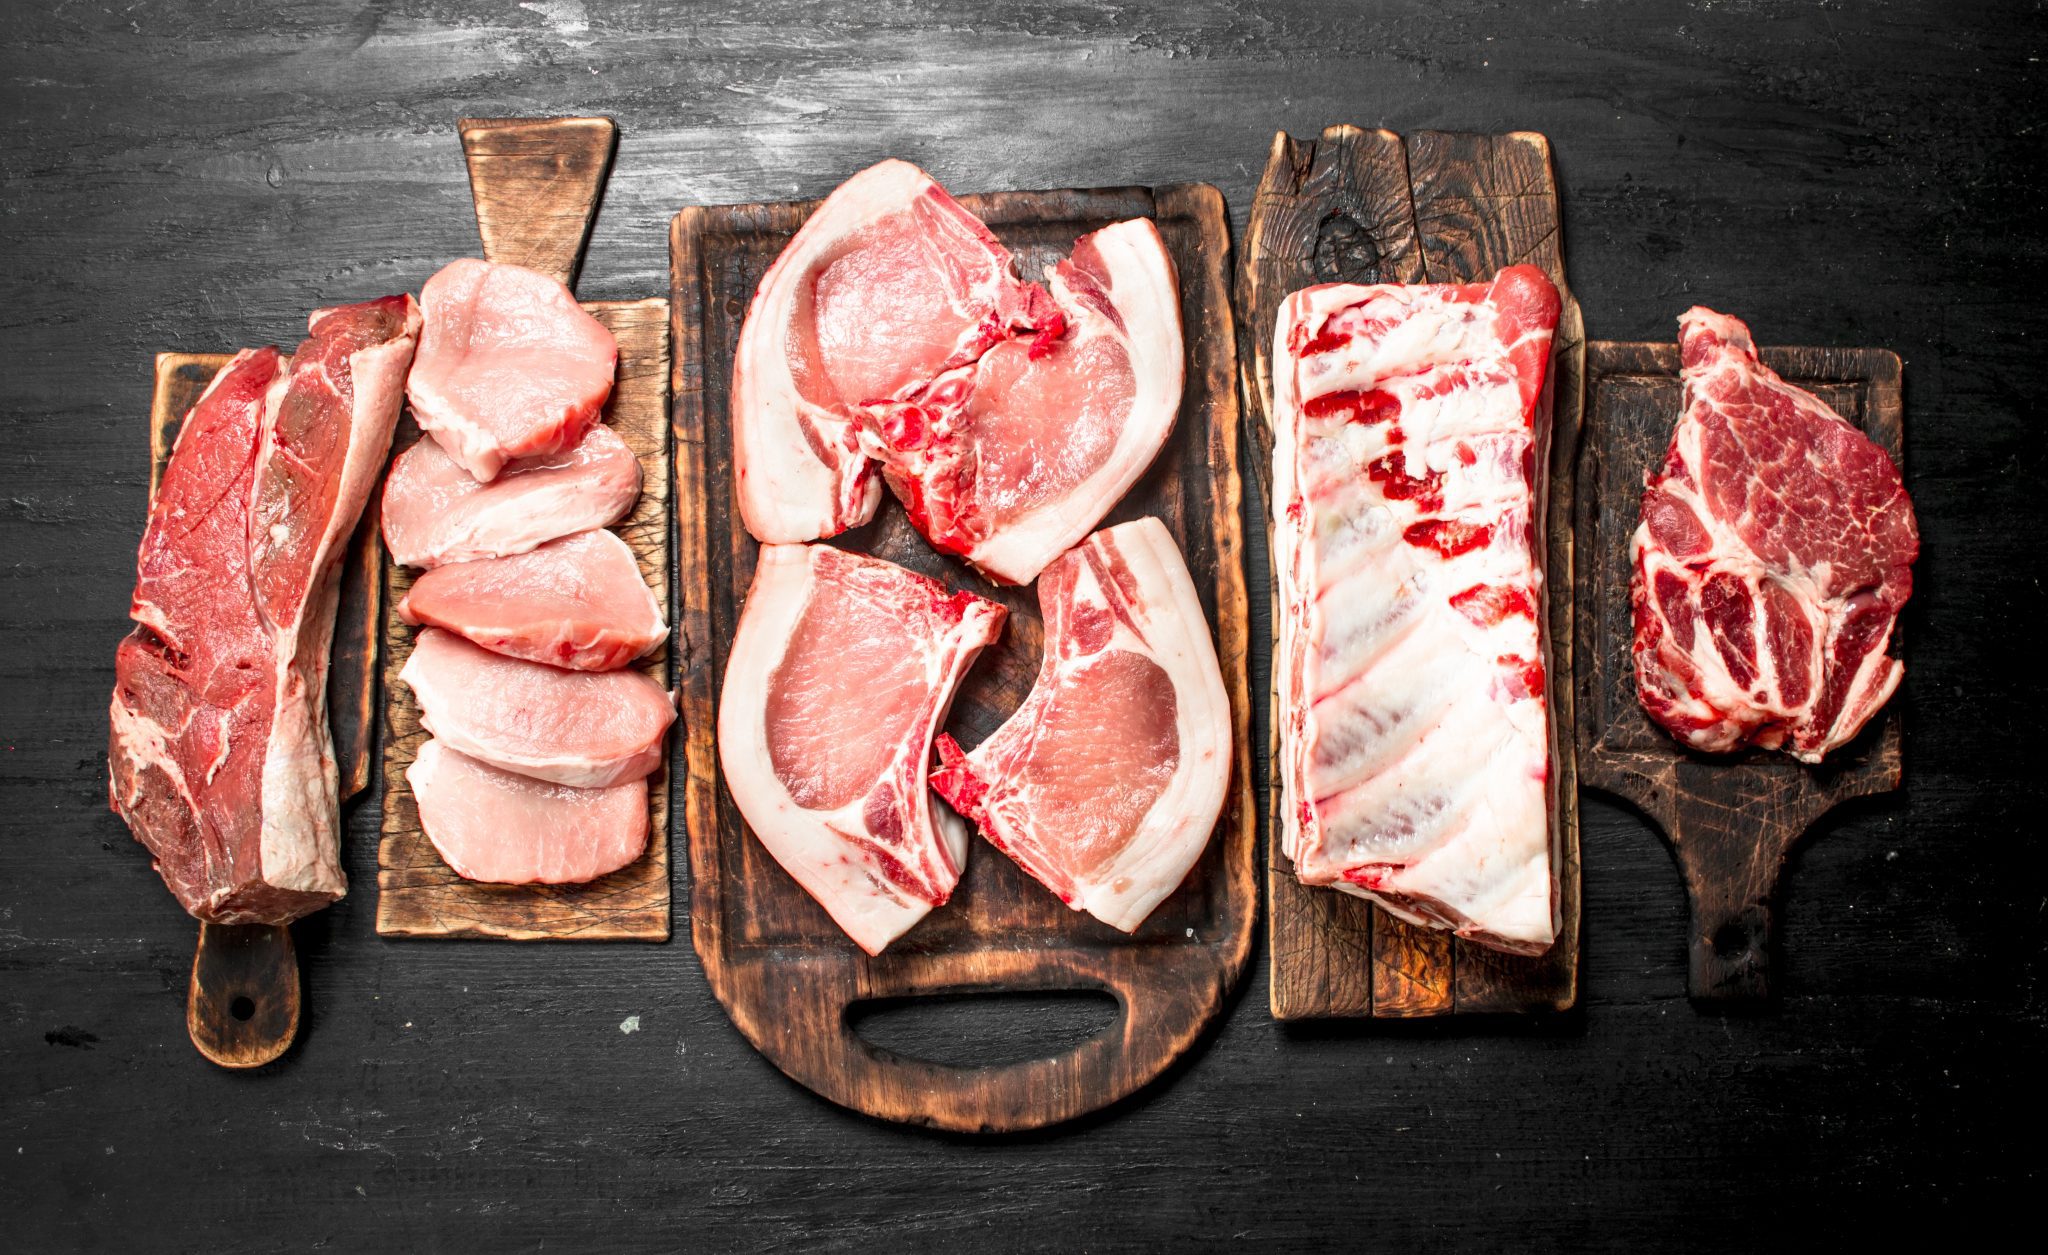 Pork Cuts Explained: Ultimate Guide To Different Cuts of Pork